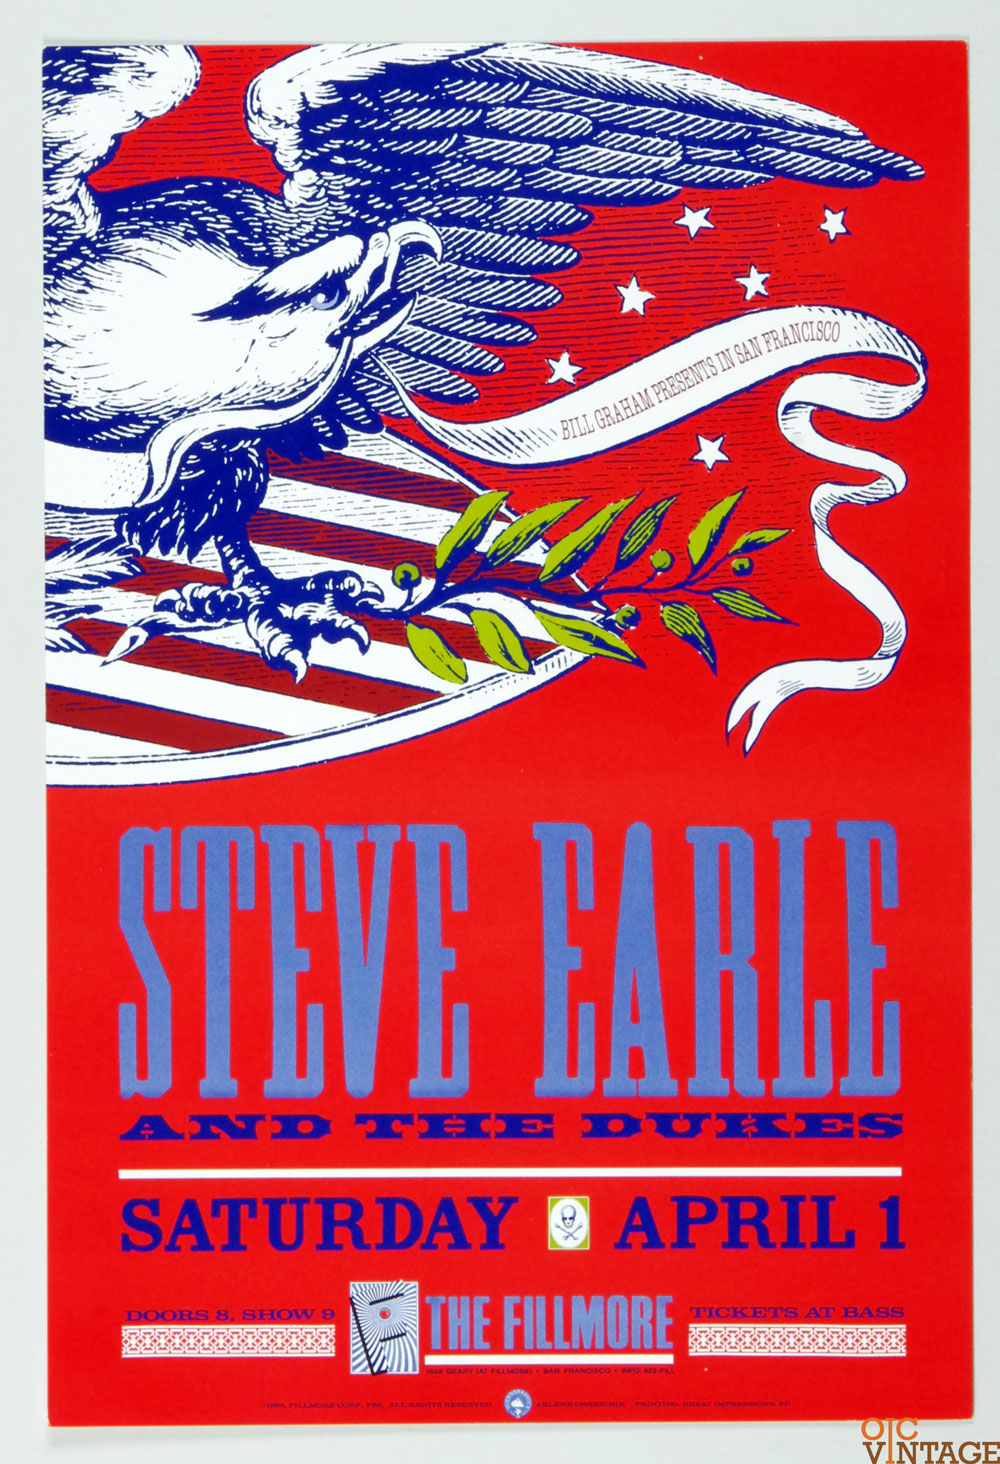 Steve Earle and the Dukes Poster 1989 Apr 1 New Fillmore San Francisco